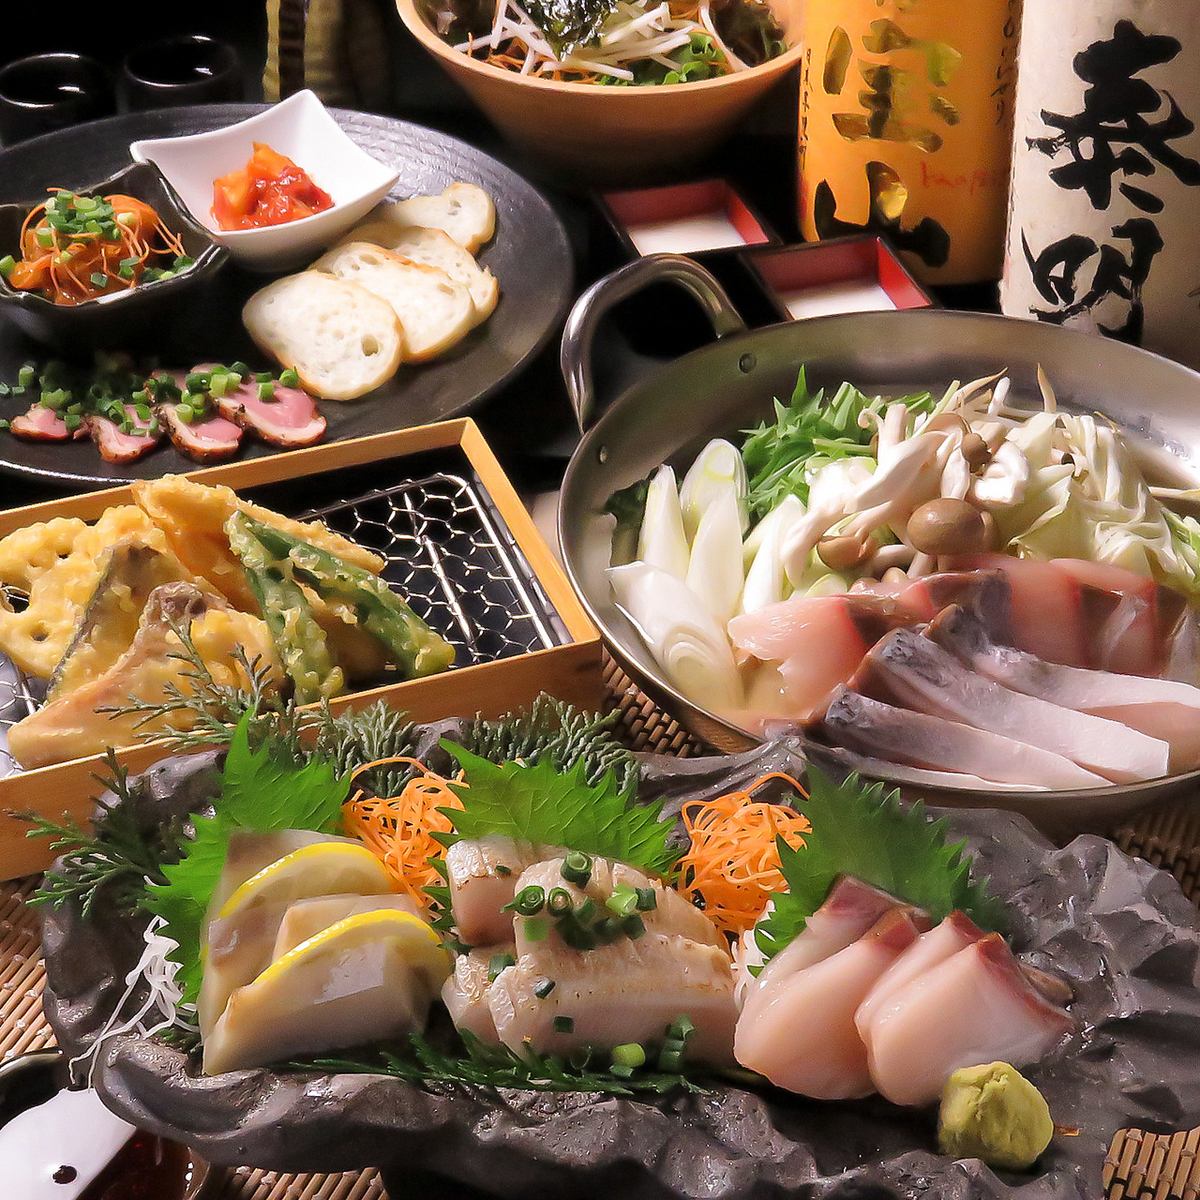 Free-range chicken soup stock "Yellowtail hot pot course! Includes 3 types of yellowtail sashimi♪ 9 dishes with 120 minutes of all-you-can-drink